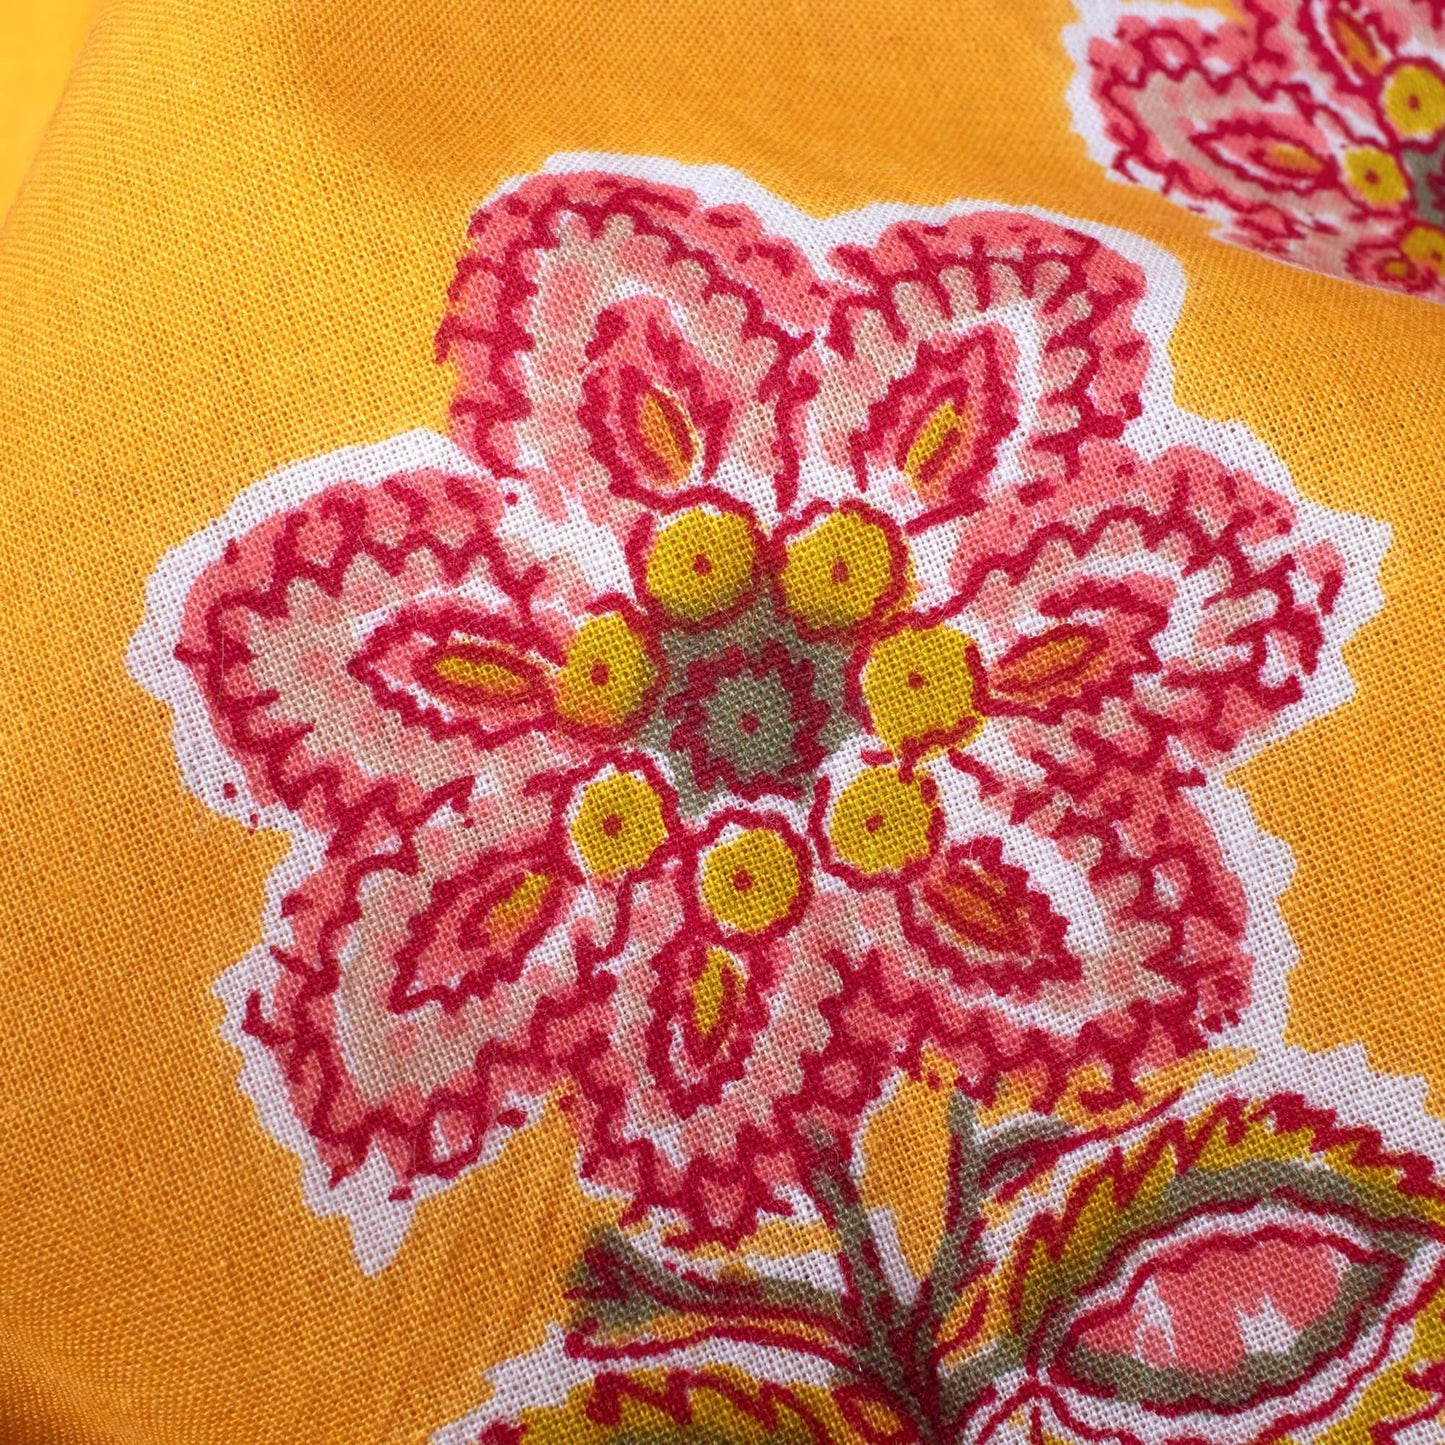 Honey Yellow And Punch Pink Floral Pattern Screen Print Cotton Mulmul Fabric - Fabcurate